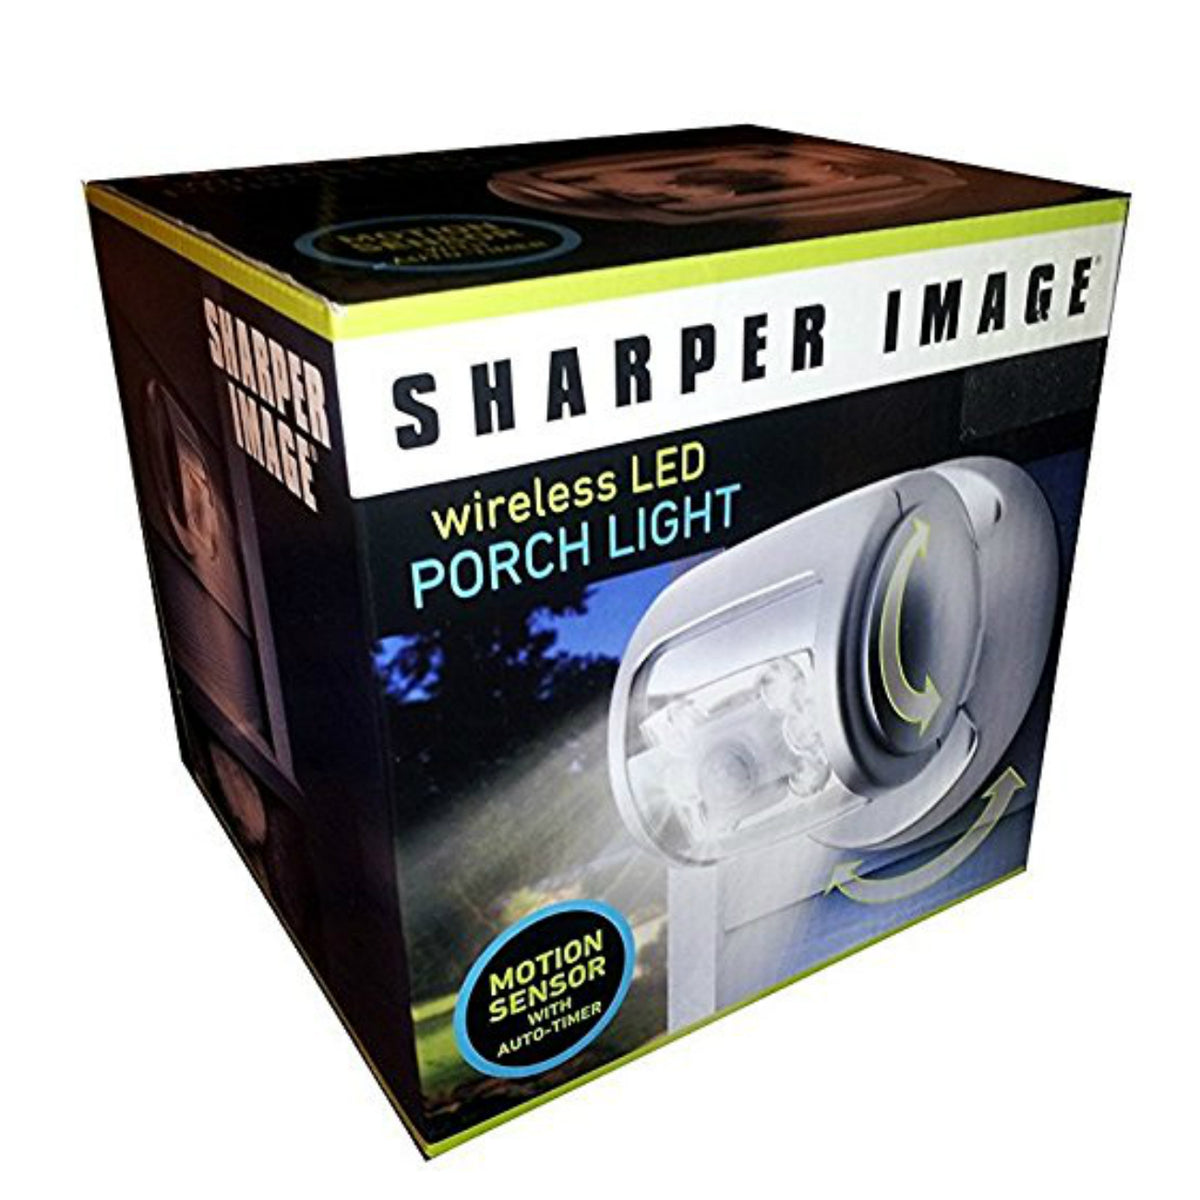 Buy sharper image wireless led porch light - Online store for lamps & light fixtures, motion sensor lights and kits in USA, on sale, low price, discount deals, coupon code